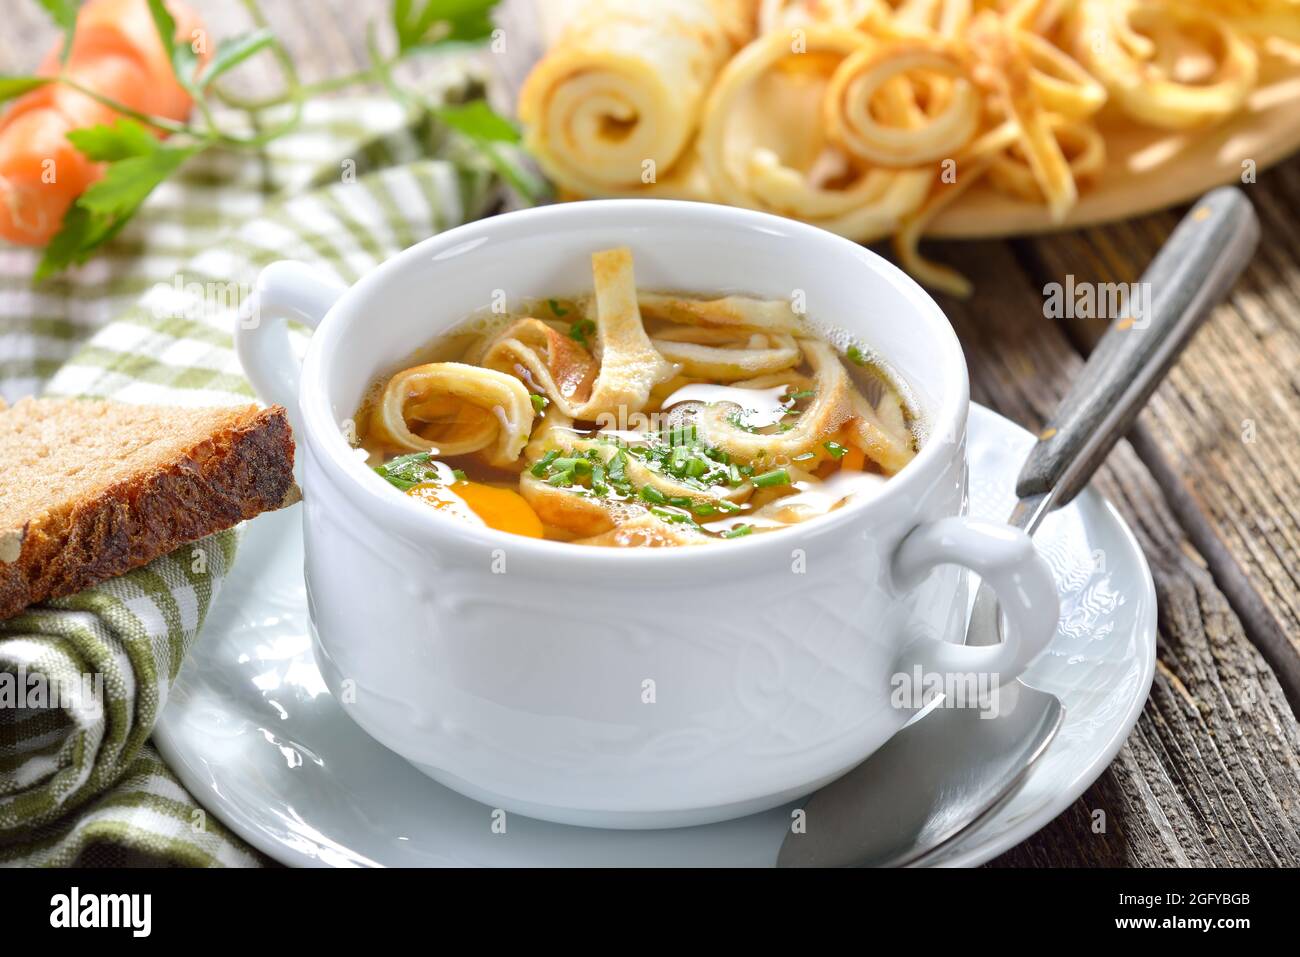 Delicious homemade beef broth with pancake strips, served with bread on a wooden table Stock Photo